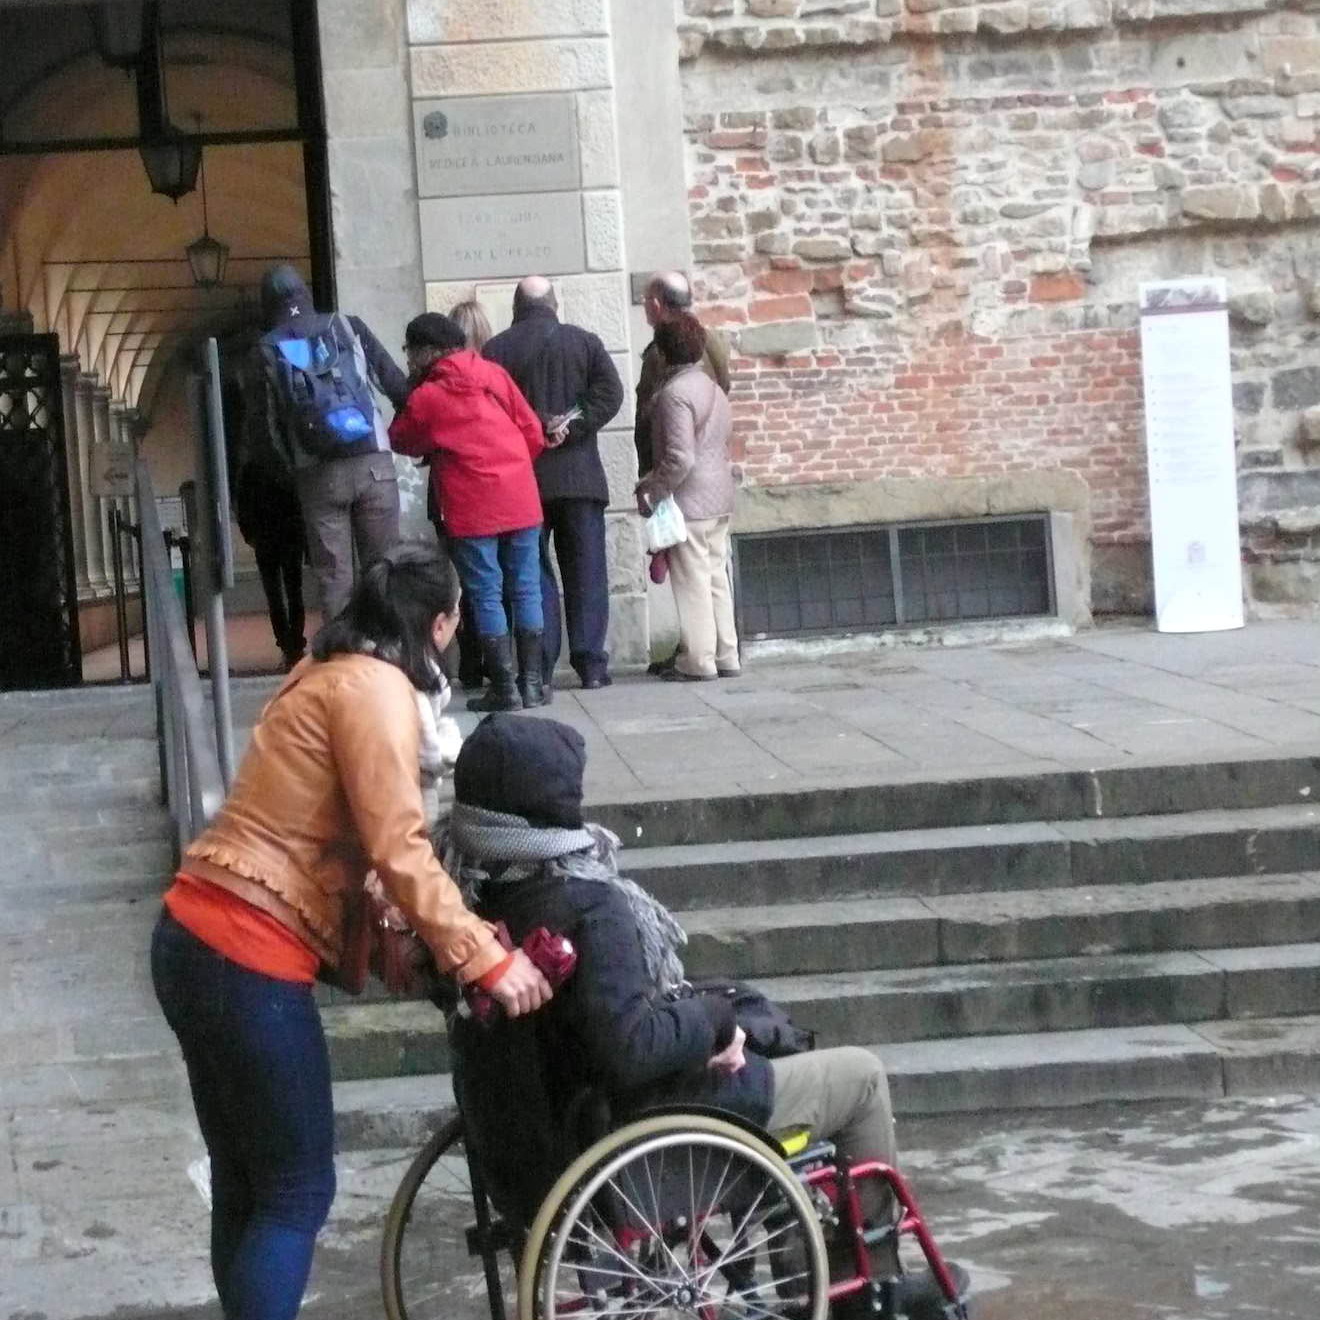 Services for tourists with disabilities